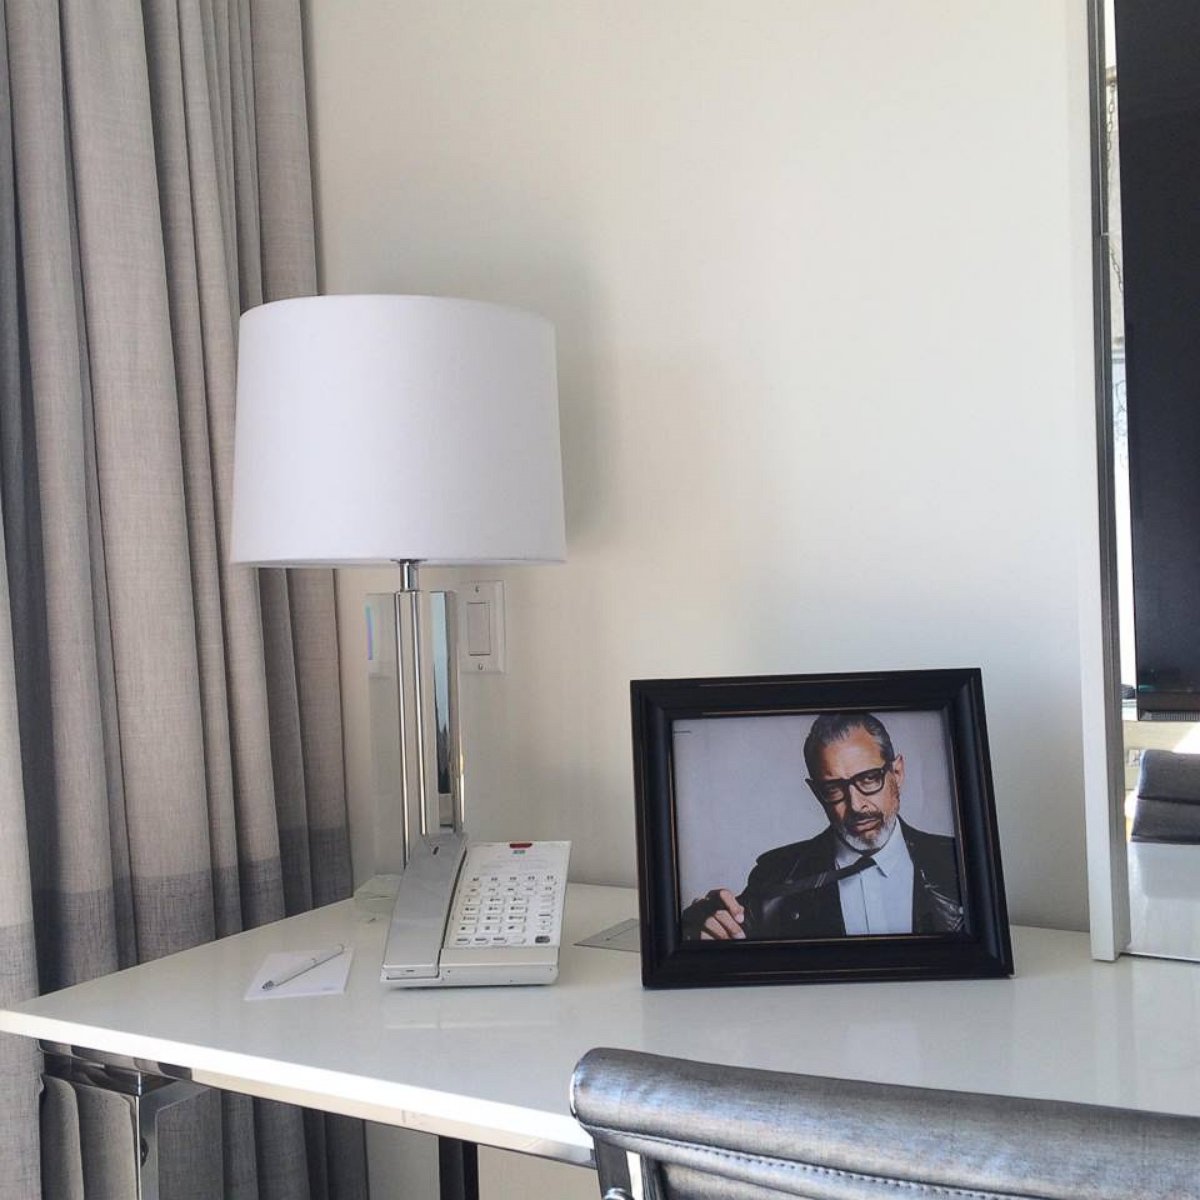 PHOTO: Man Asks for Hotel Room Adorned with Framed Pictures of Jeff Goldblum